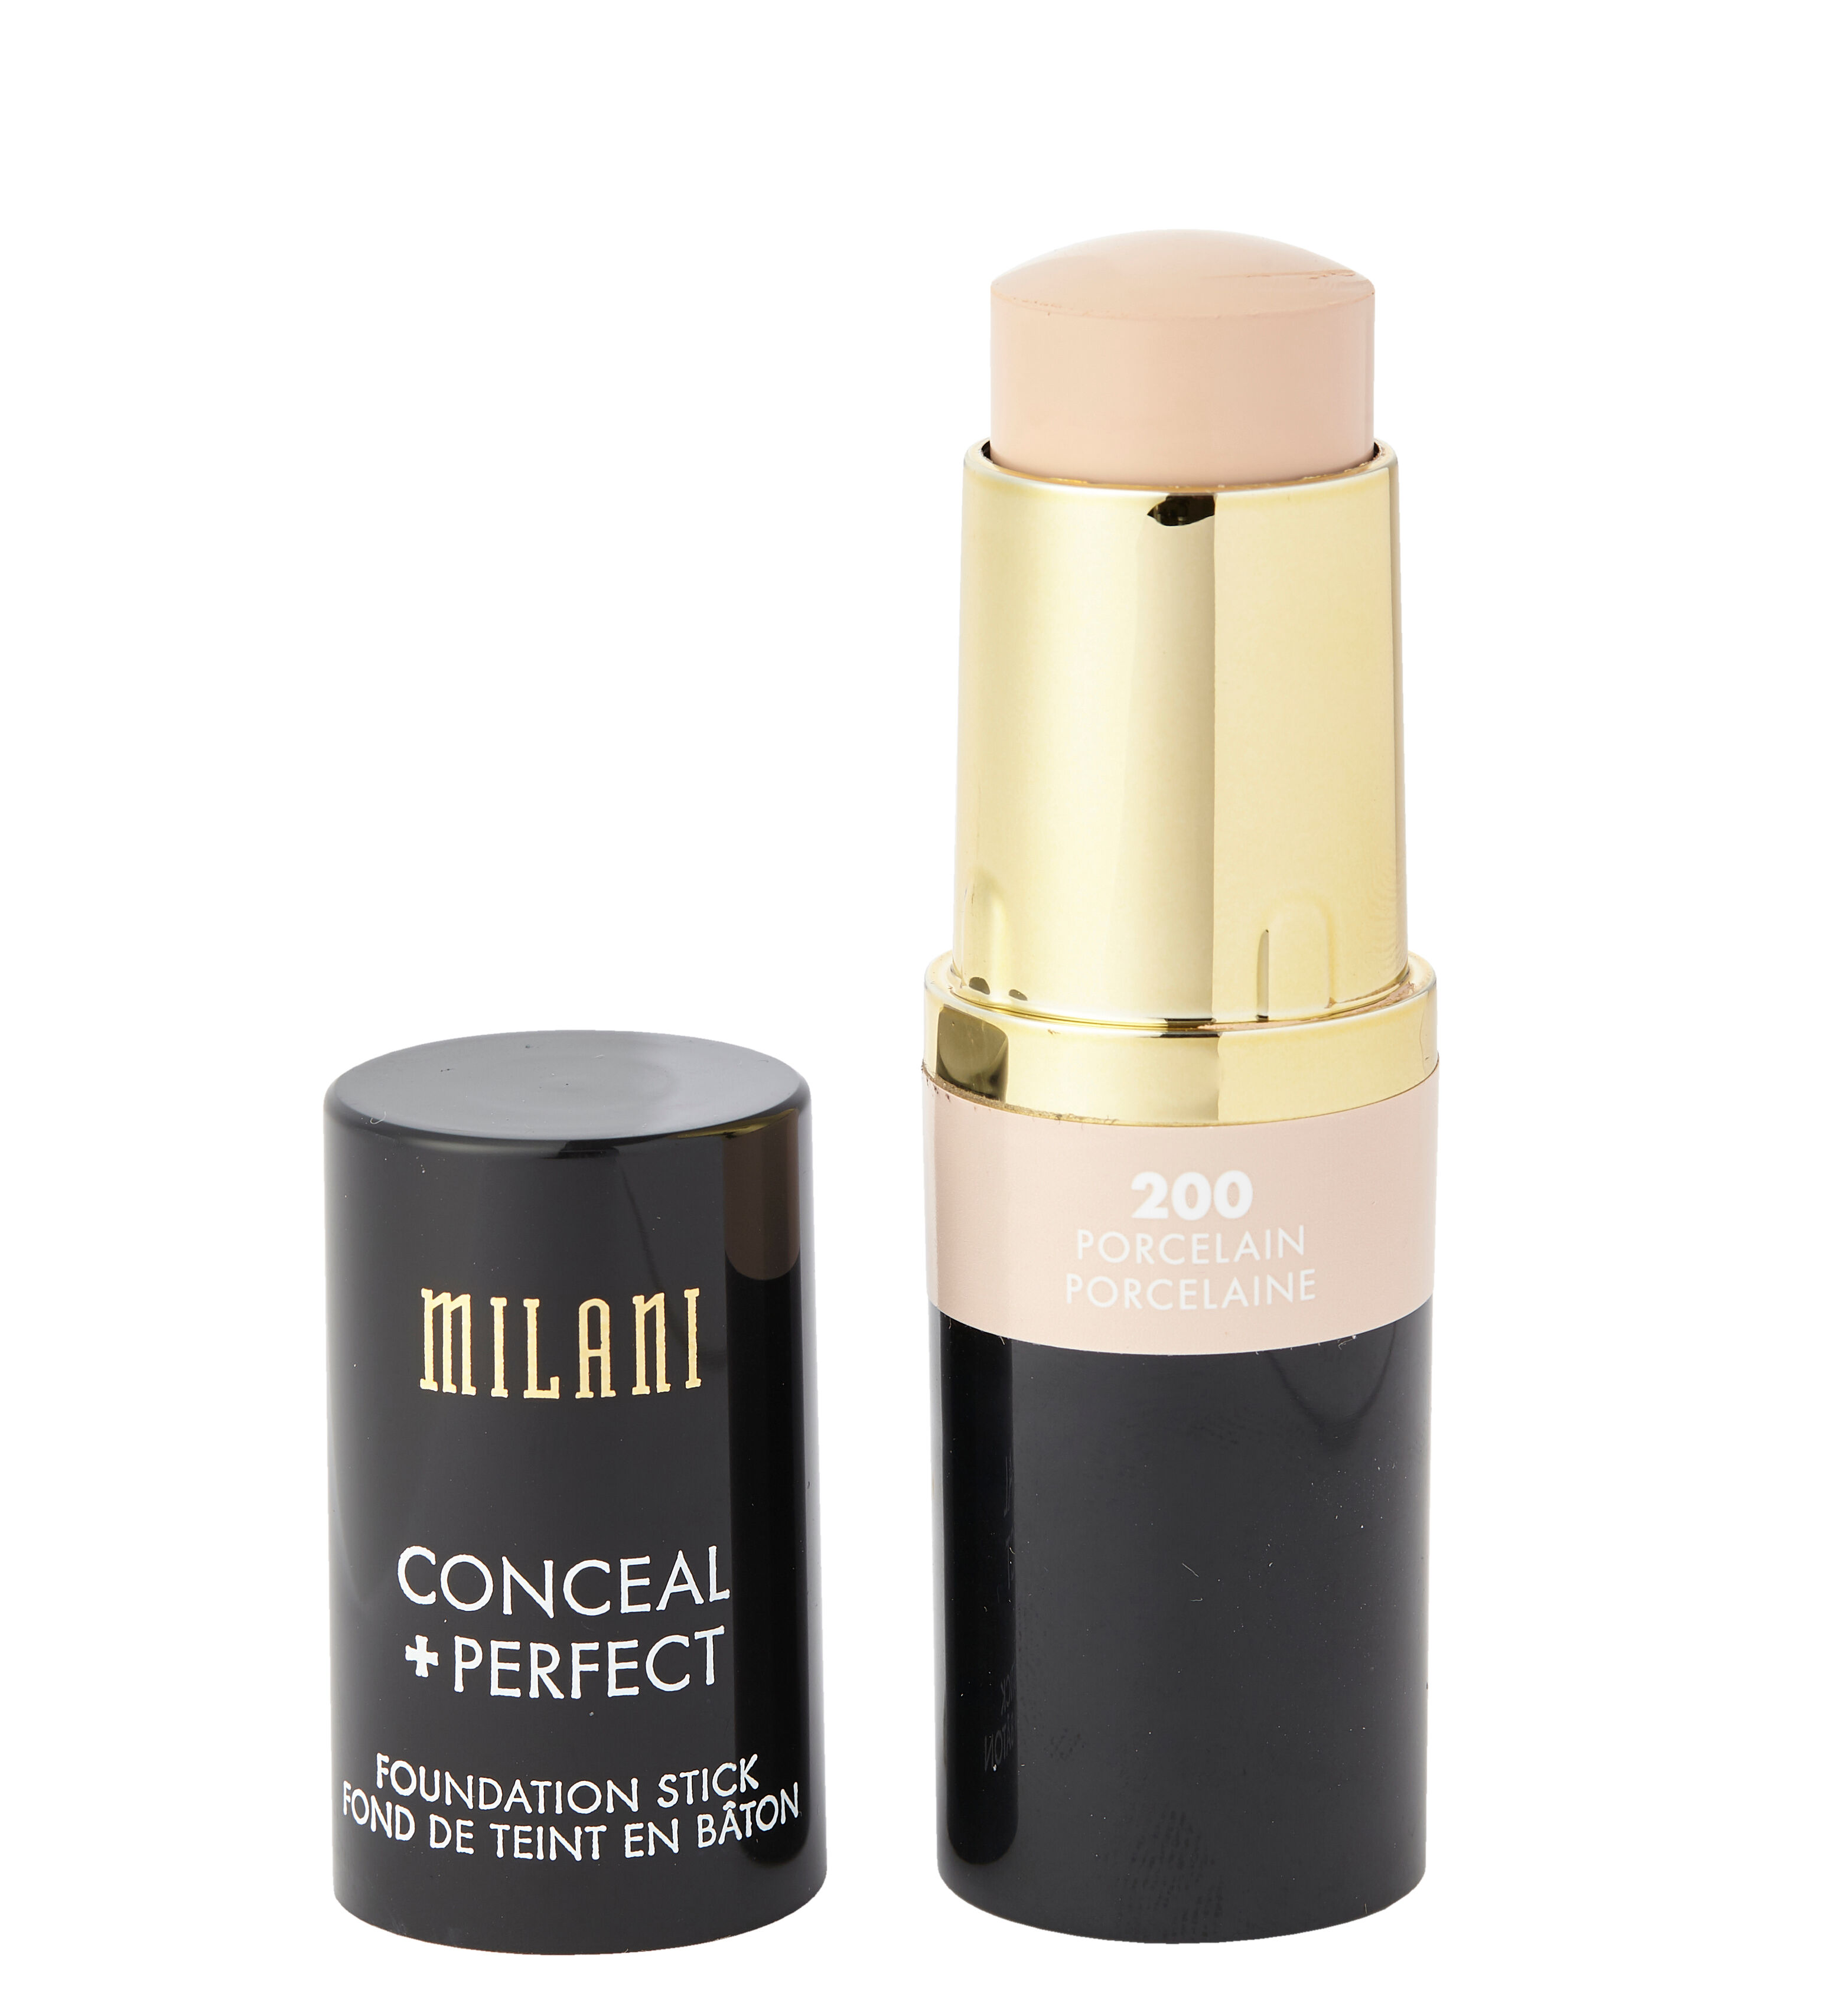 Milani Conceal And Perfect Foundation Stick 200 Porcelain 13g